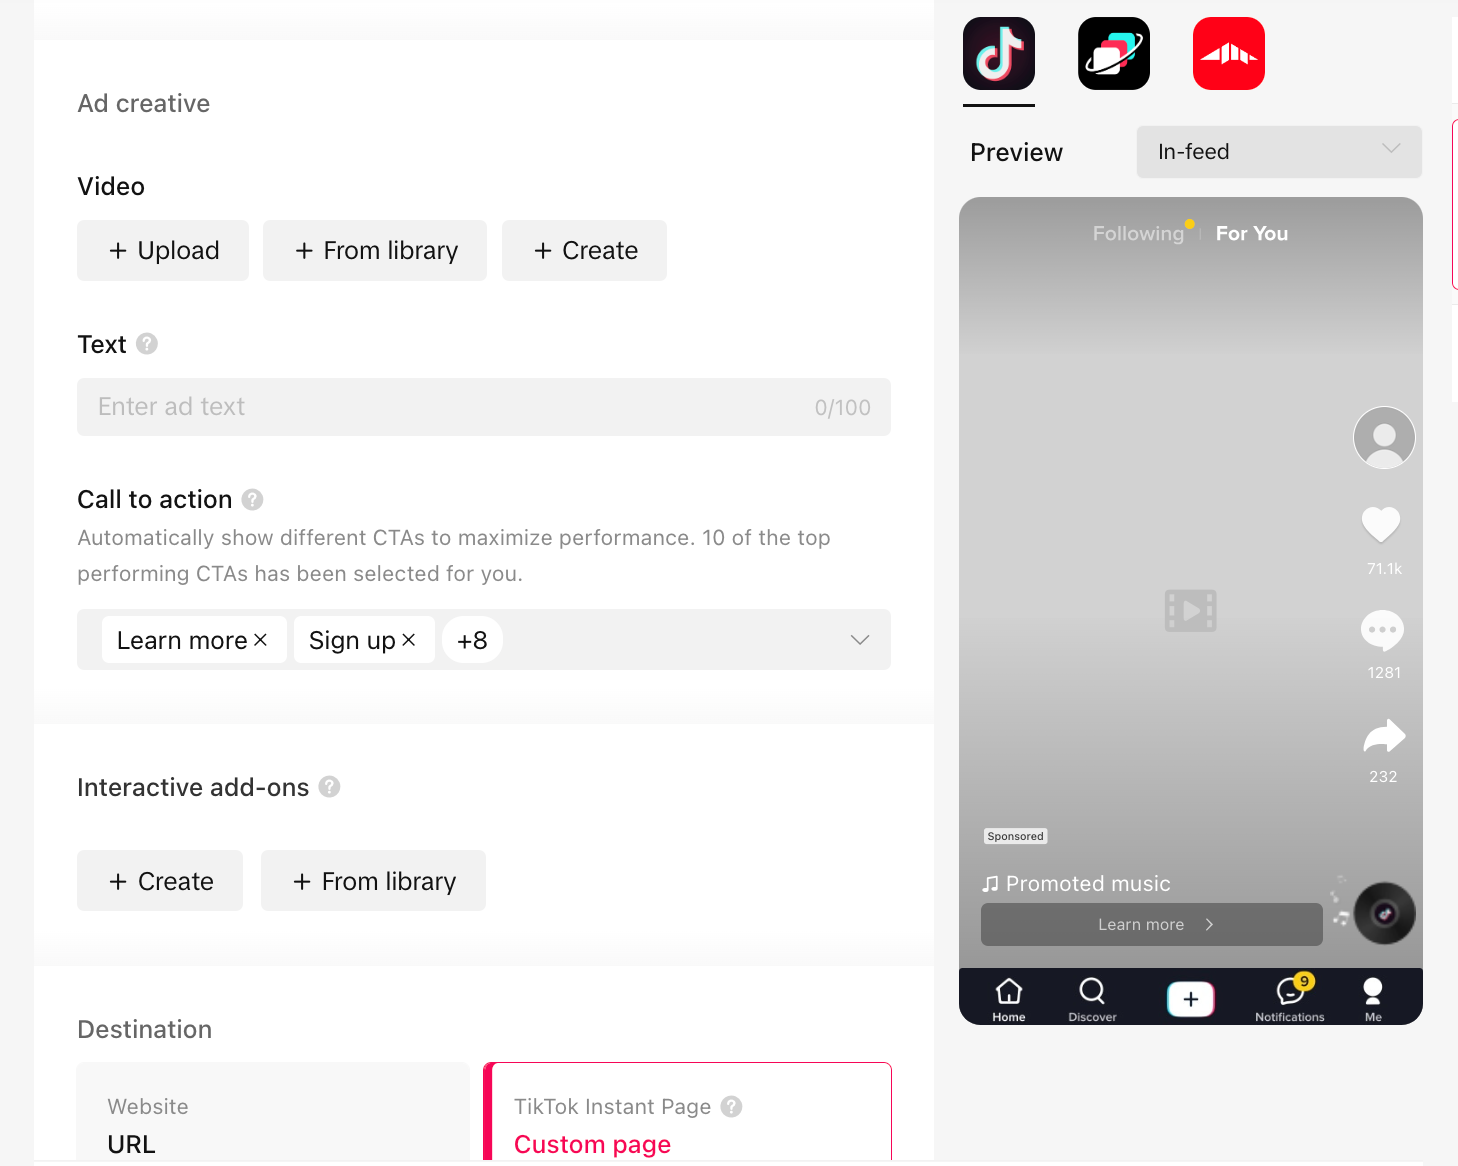 The ad creative tab in the TikTok ad set-up process lets you upload videos from your lbrary or create one.